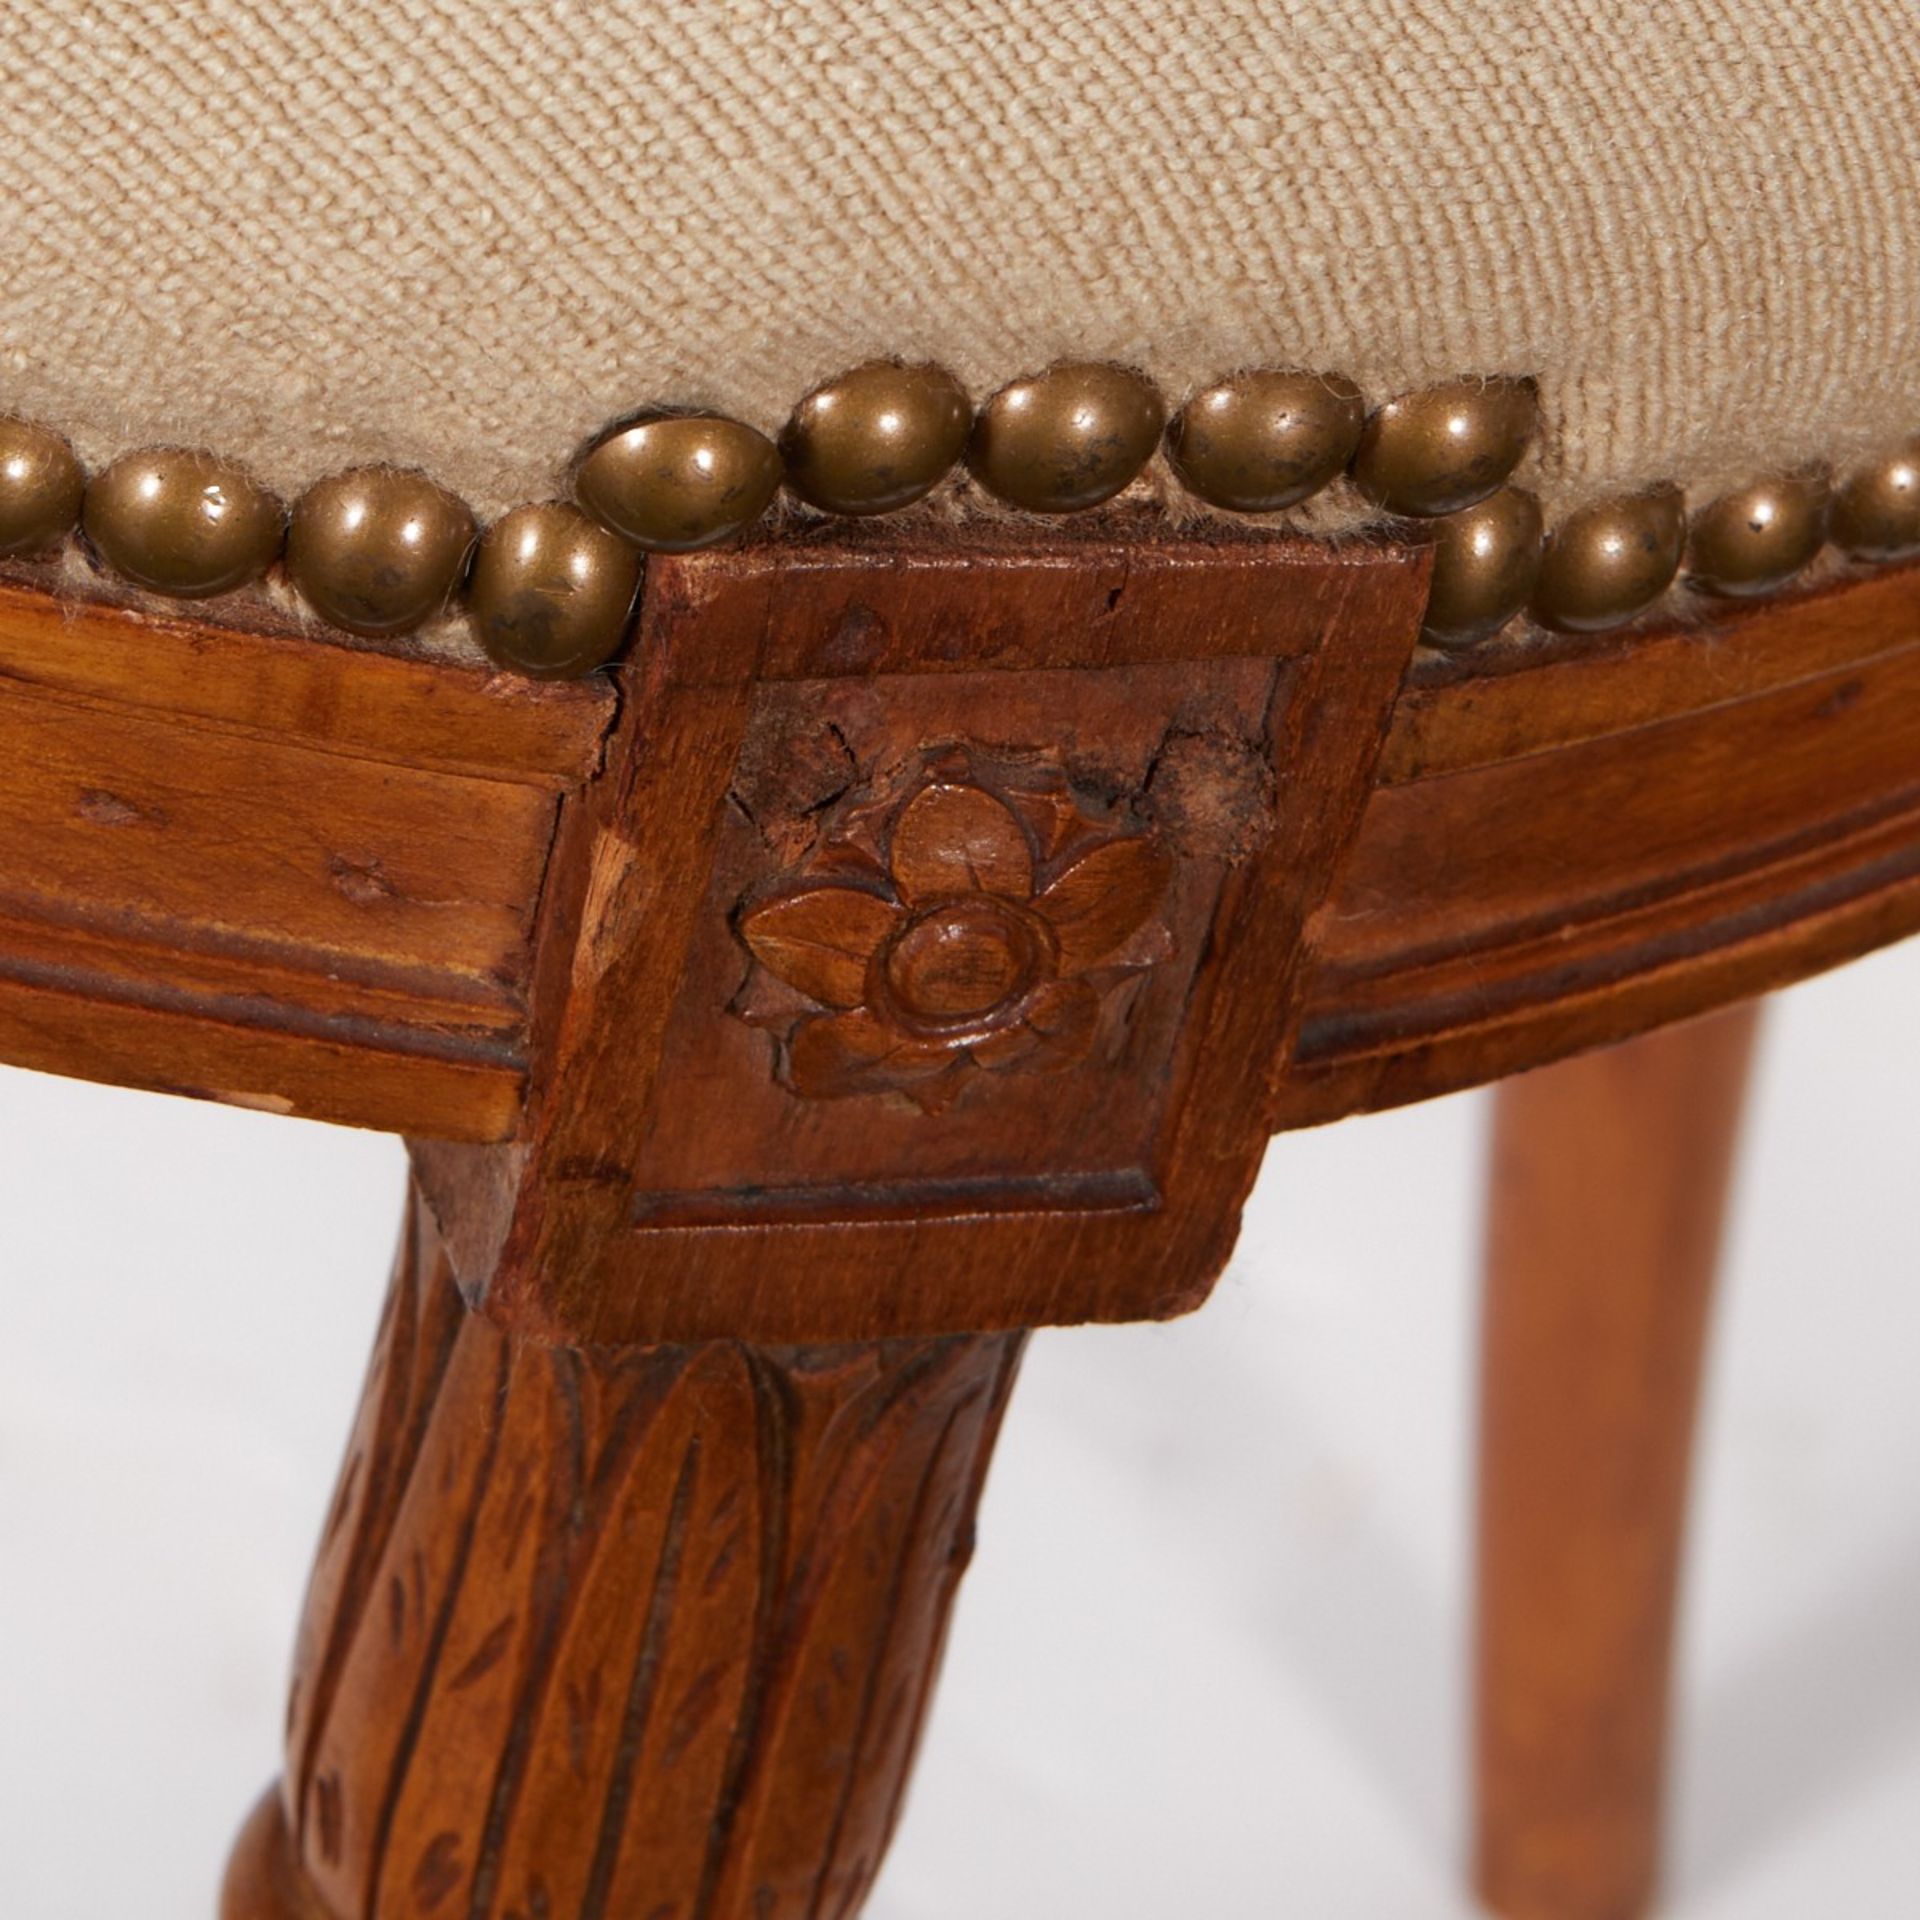 Pr French Side Chairs w/ Floral Decoration - Image 9 of 10